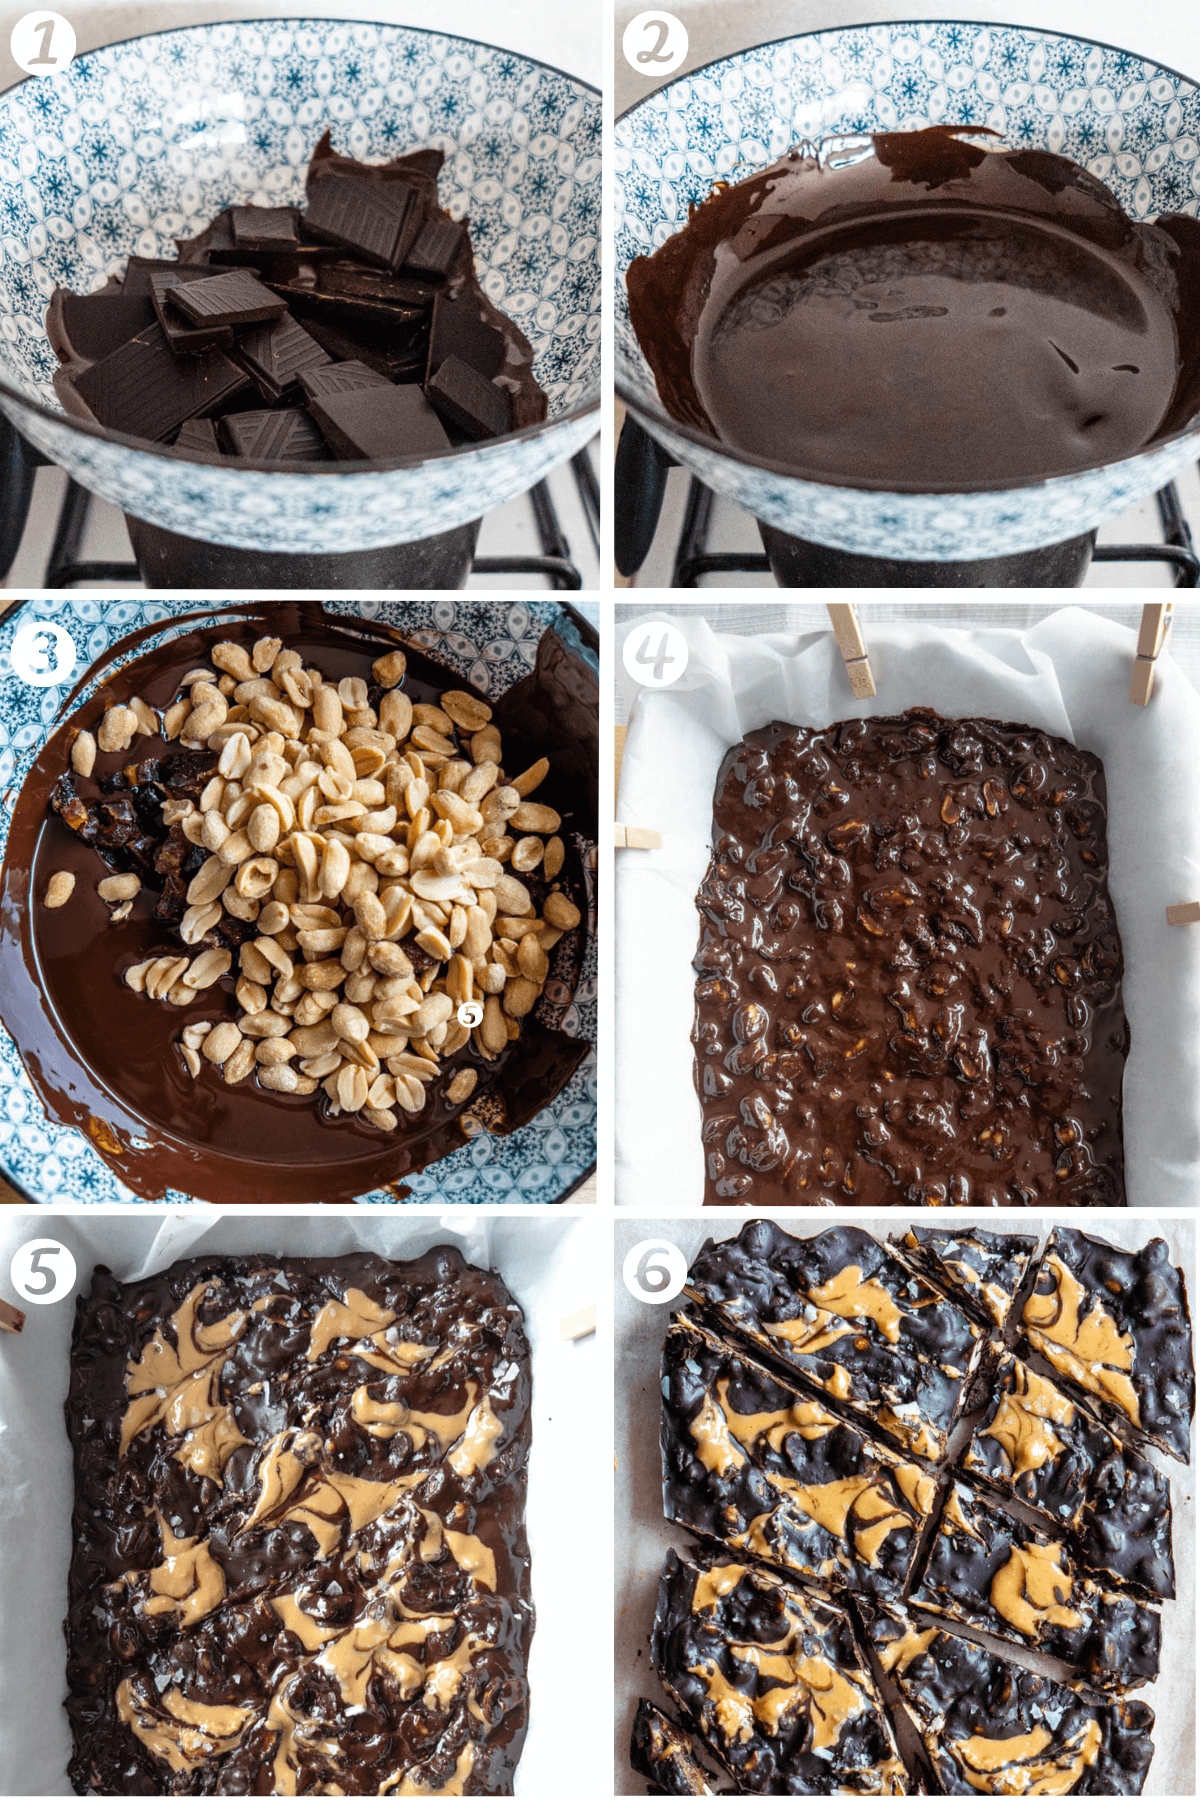 Simple step by step on how to make chocolate bark